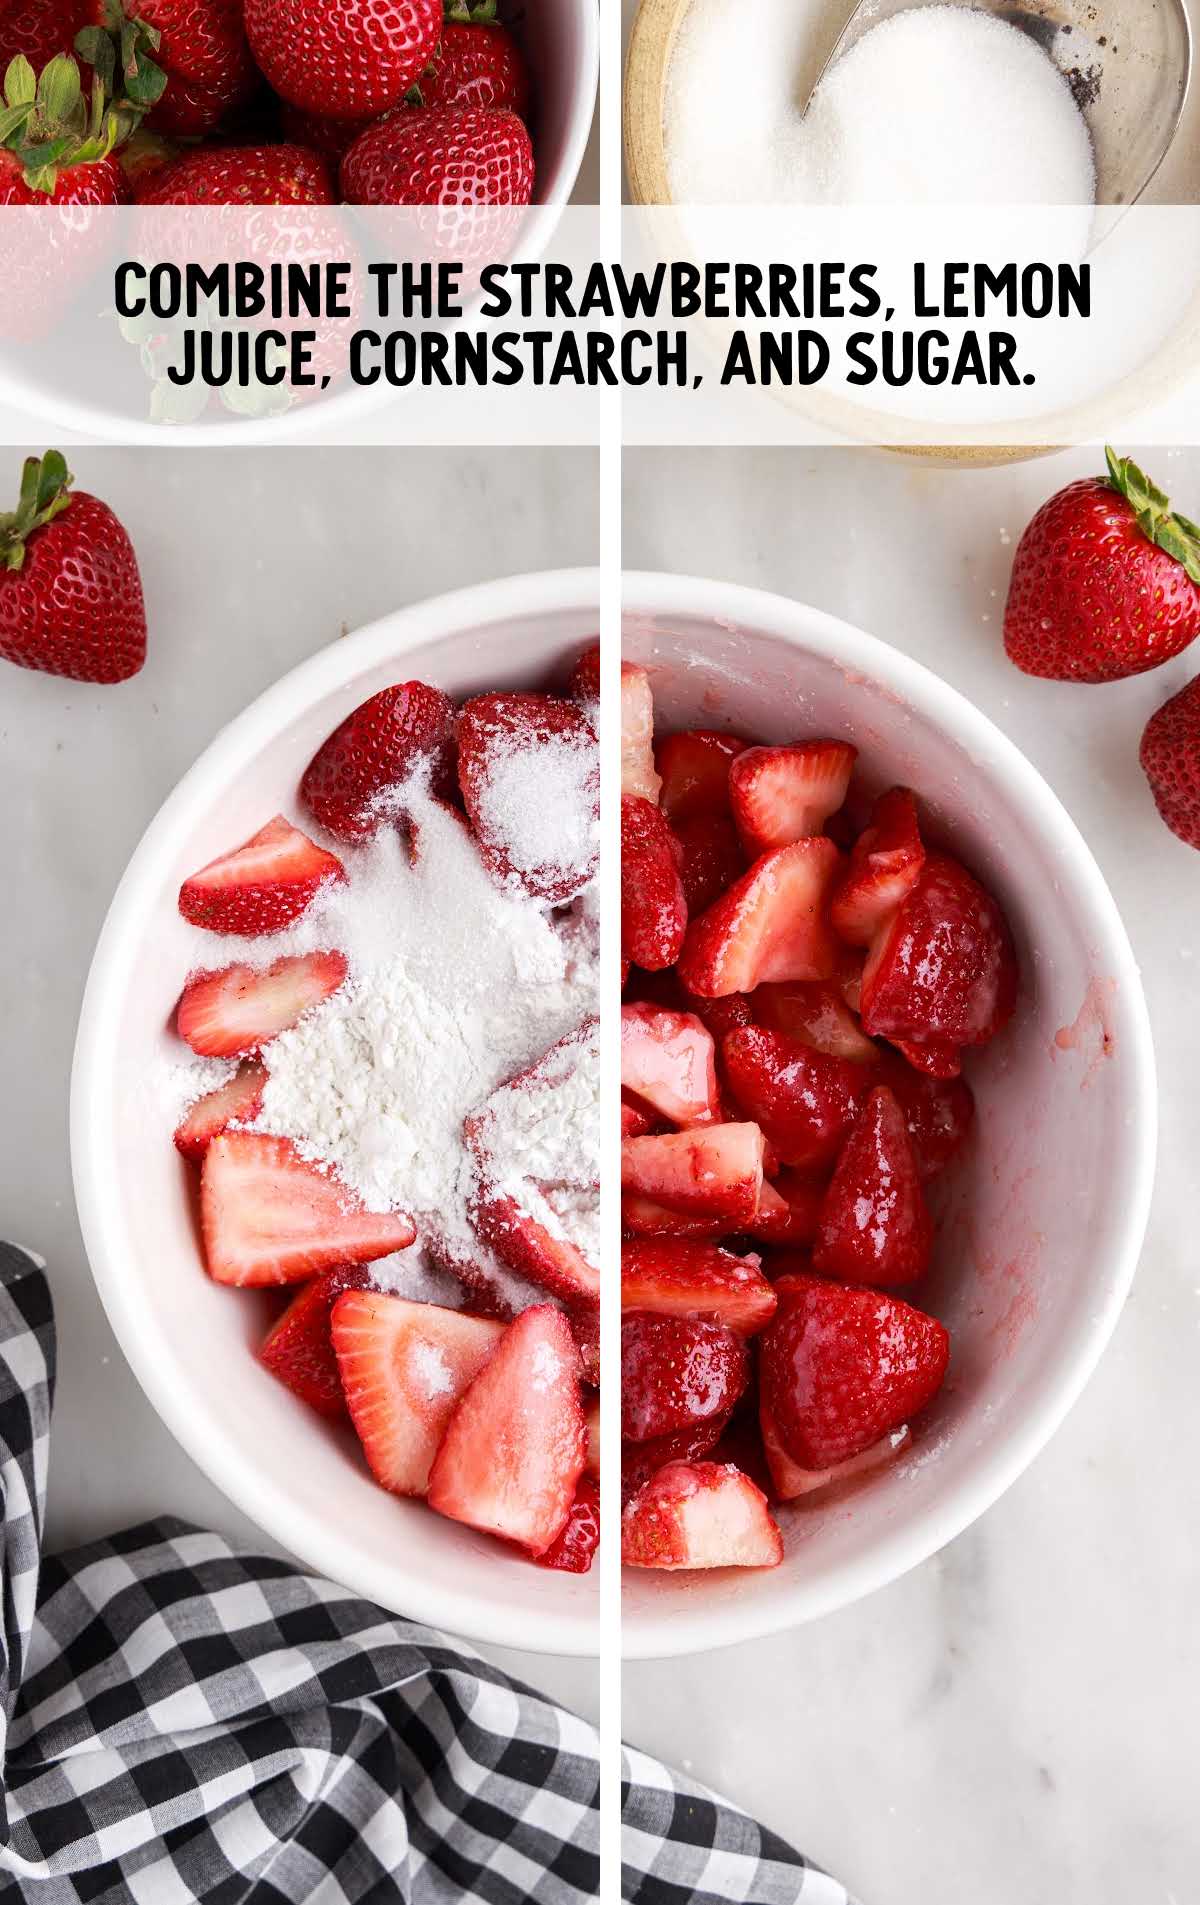 strawberries, lemon juice, cornstarch and sugar combined in a bowl